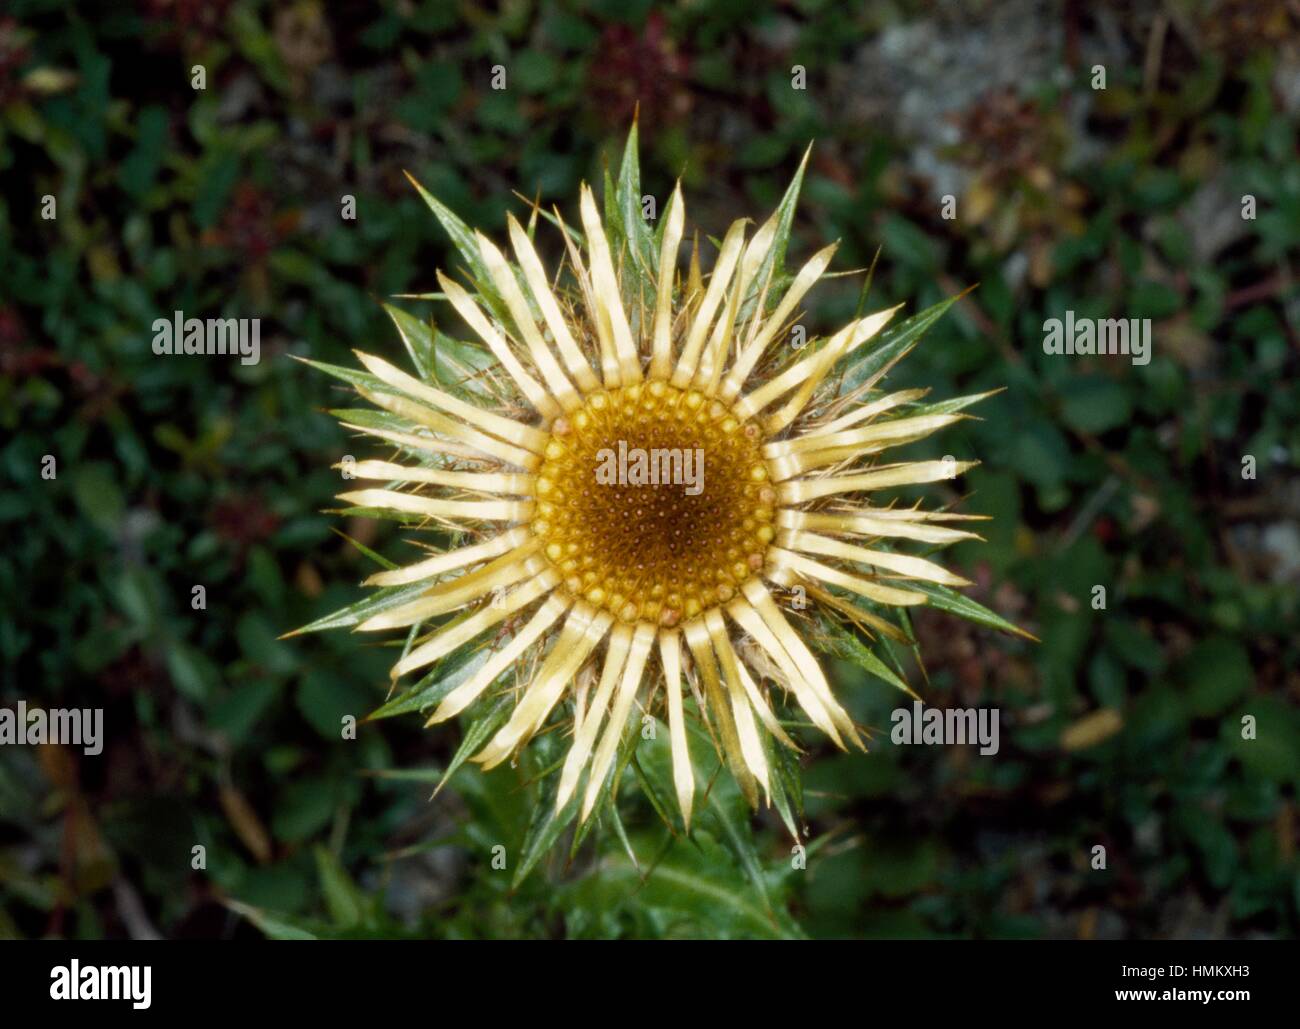 Stemless carline thistle, Dwarf carline thistle or Silver thistle (Carlina acaulis), Asteraceae. Stock Photo